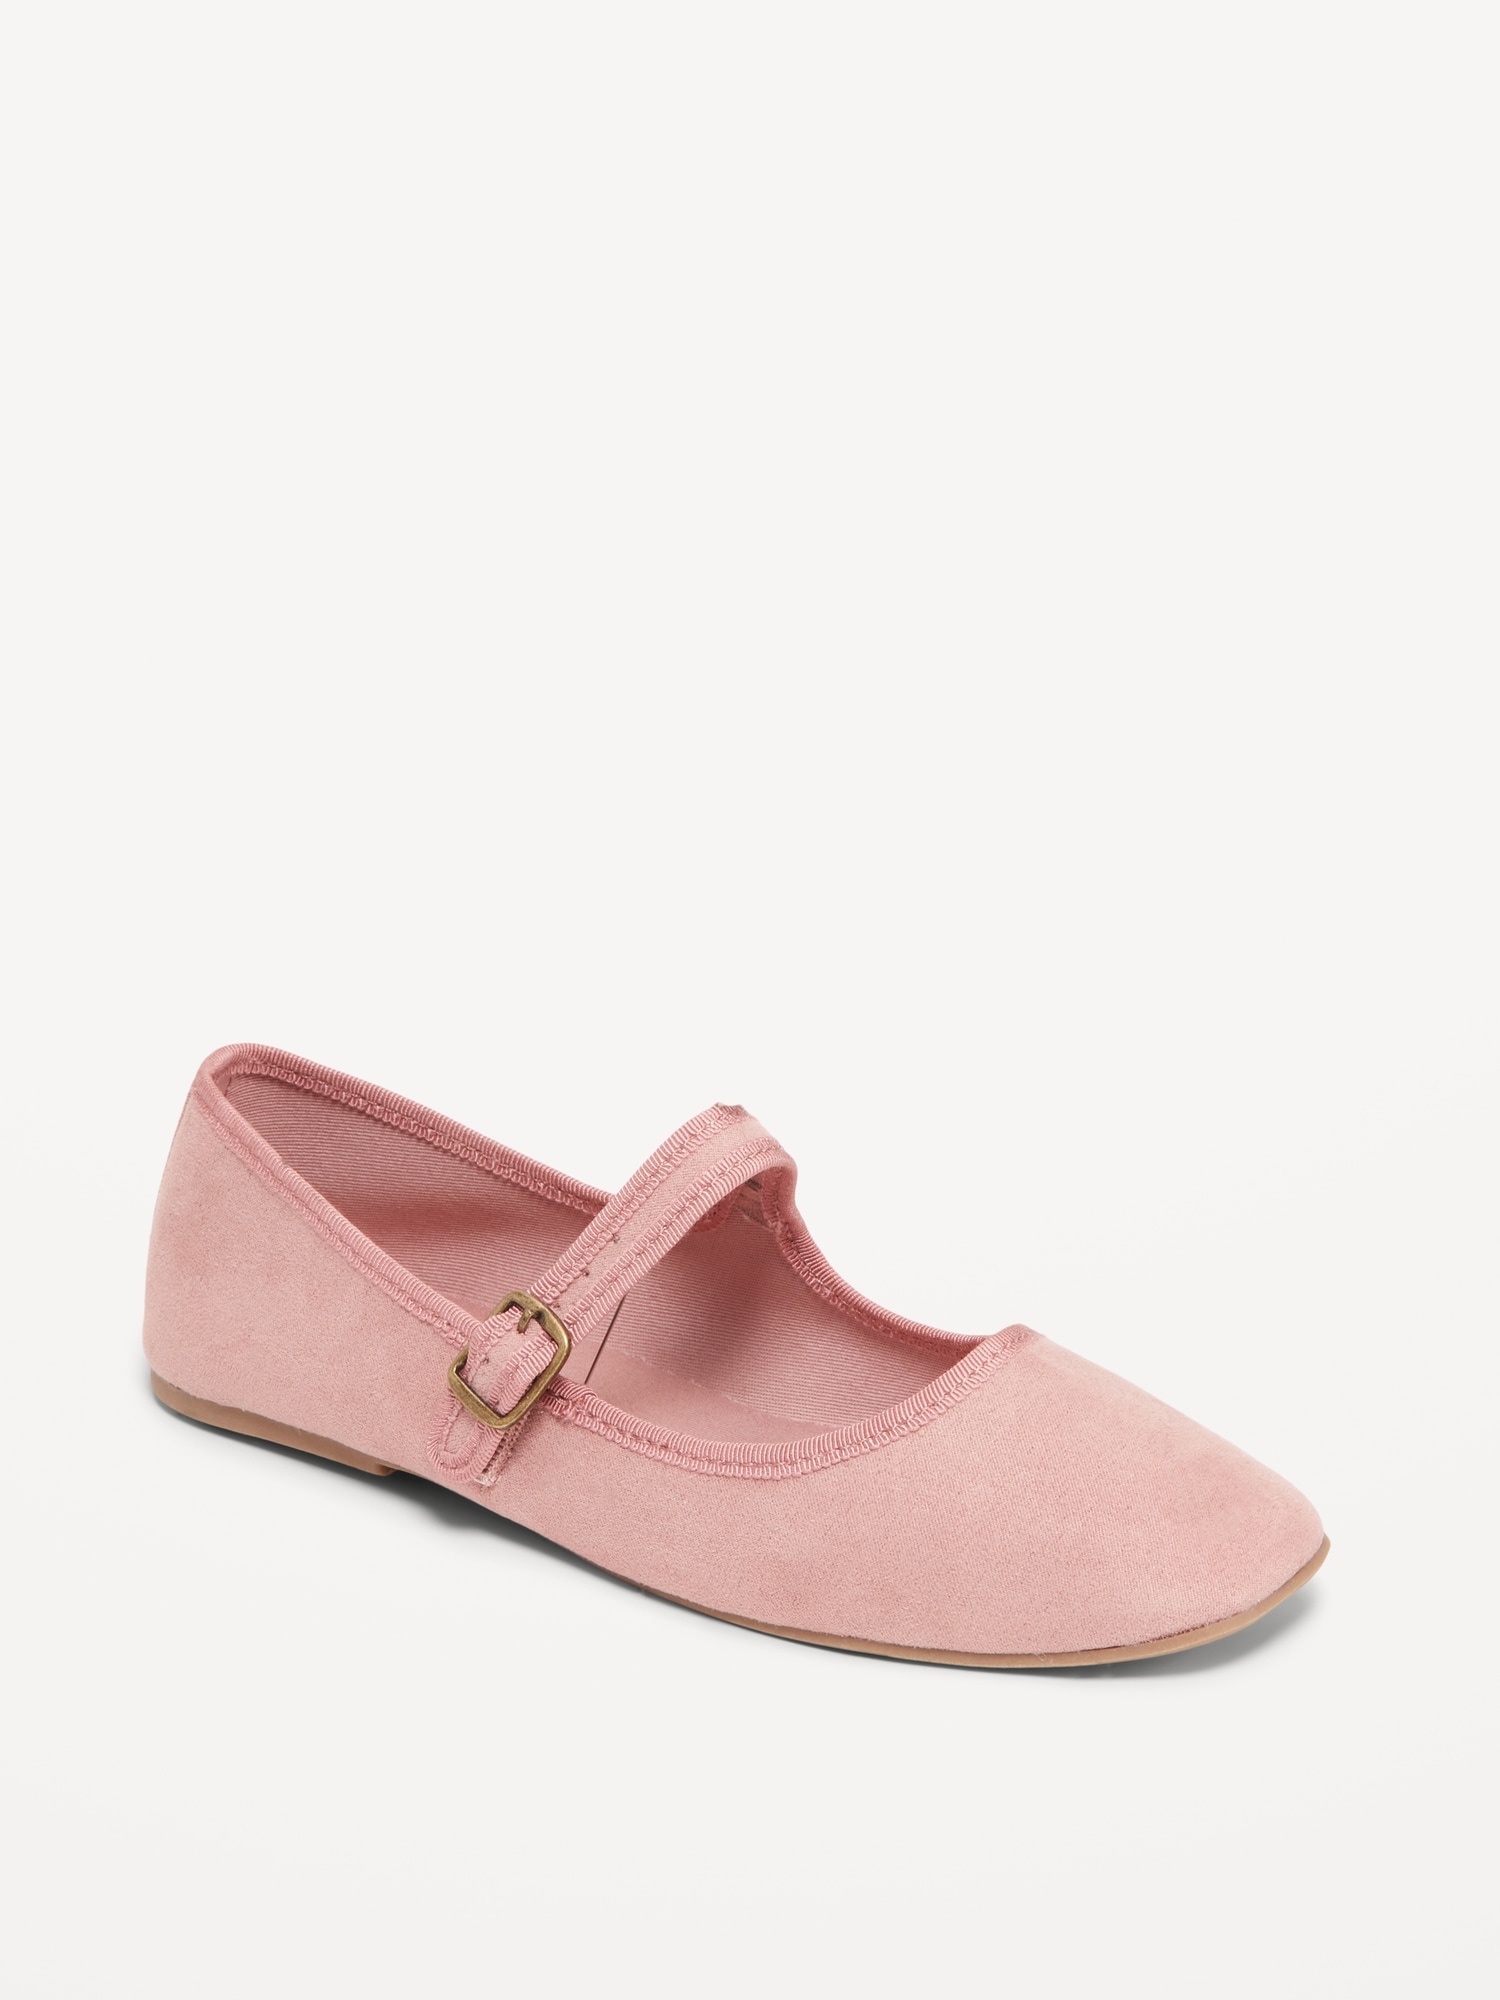 Oldnavy Faux-Suede Ballet Flat Shoes for Girls